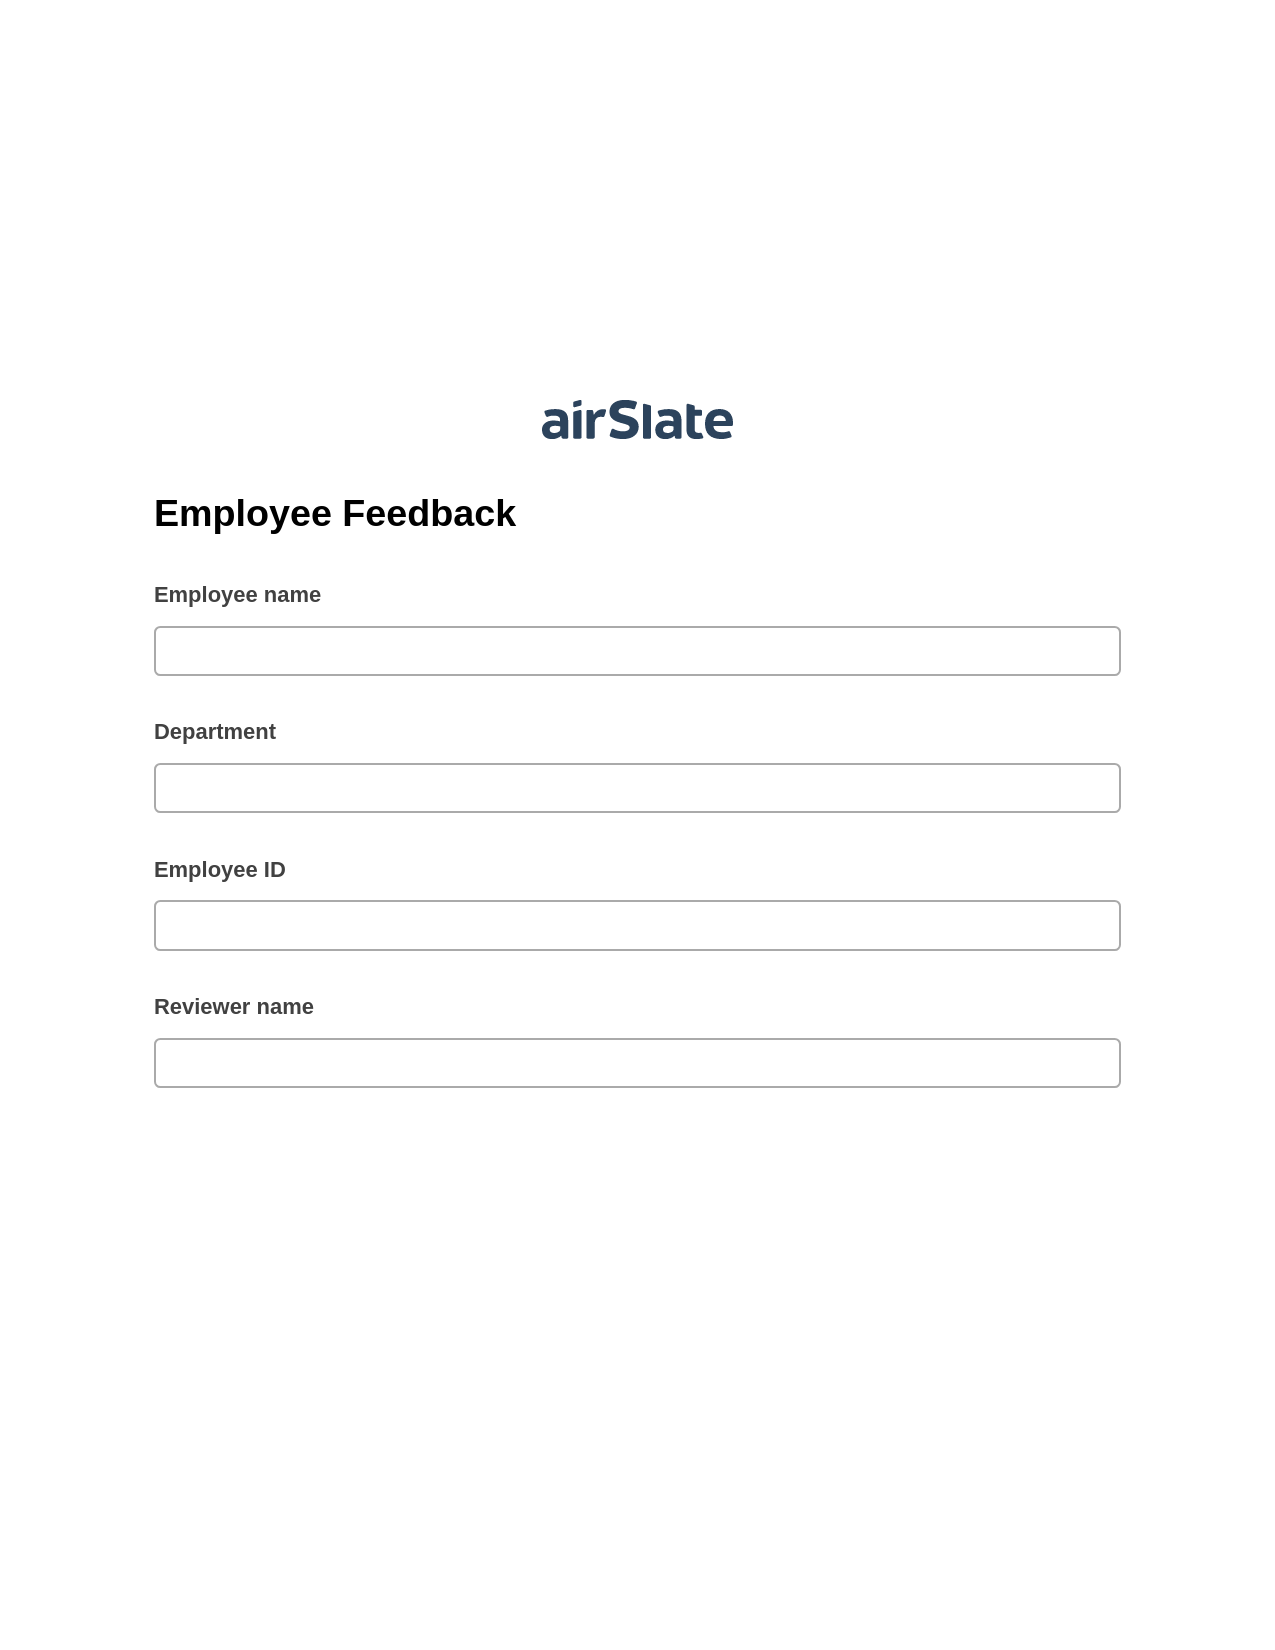 Employee Feedback Pre-fill Document Bot, Create NetSuite Records Bot, Post-finish Document Bot